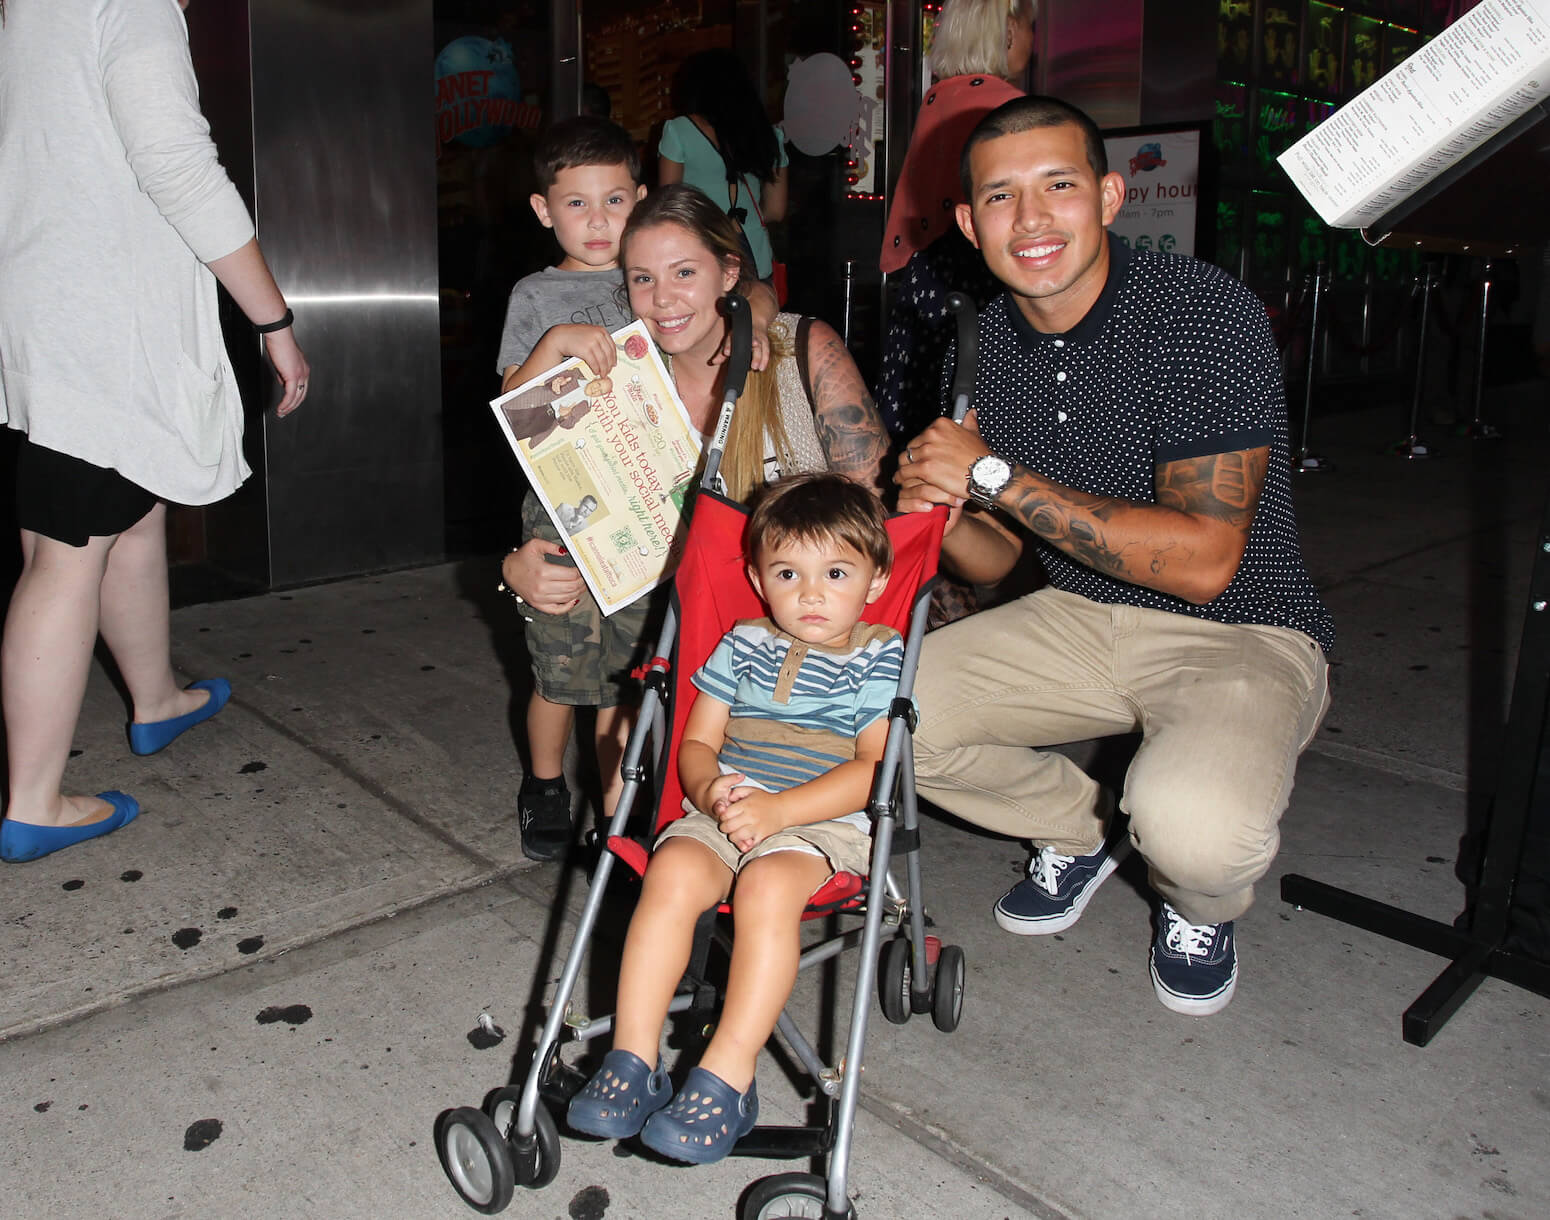 'Teen Mom 2' star Kailyn Lowry and Javi Marroquin with sons Lincoln and Isaac Marroquin